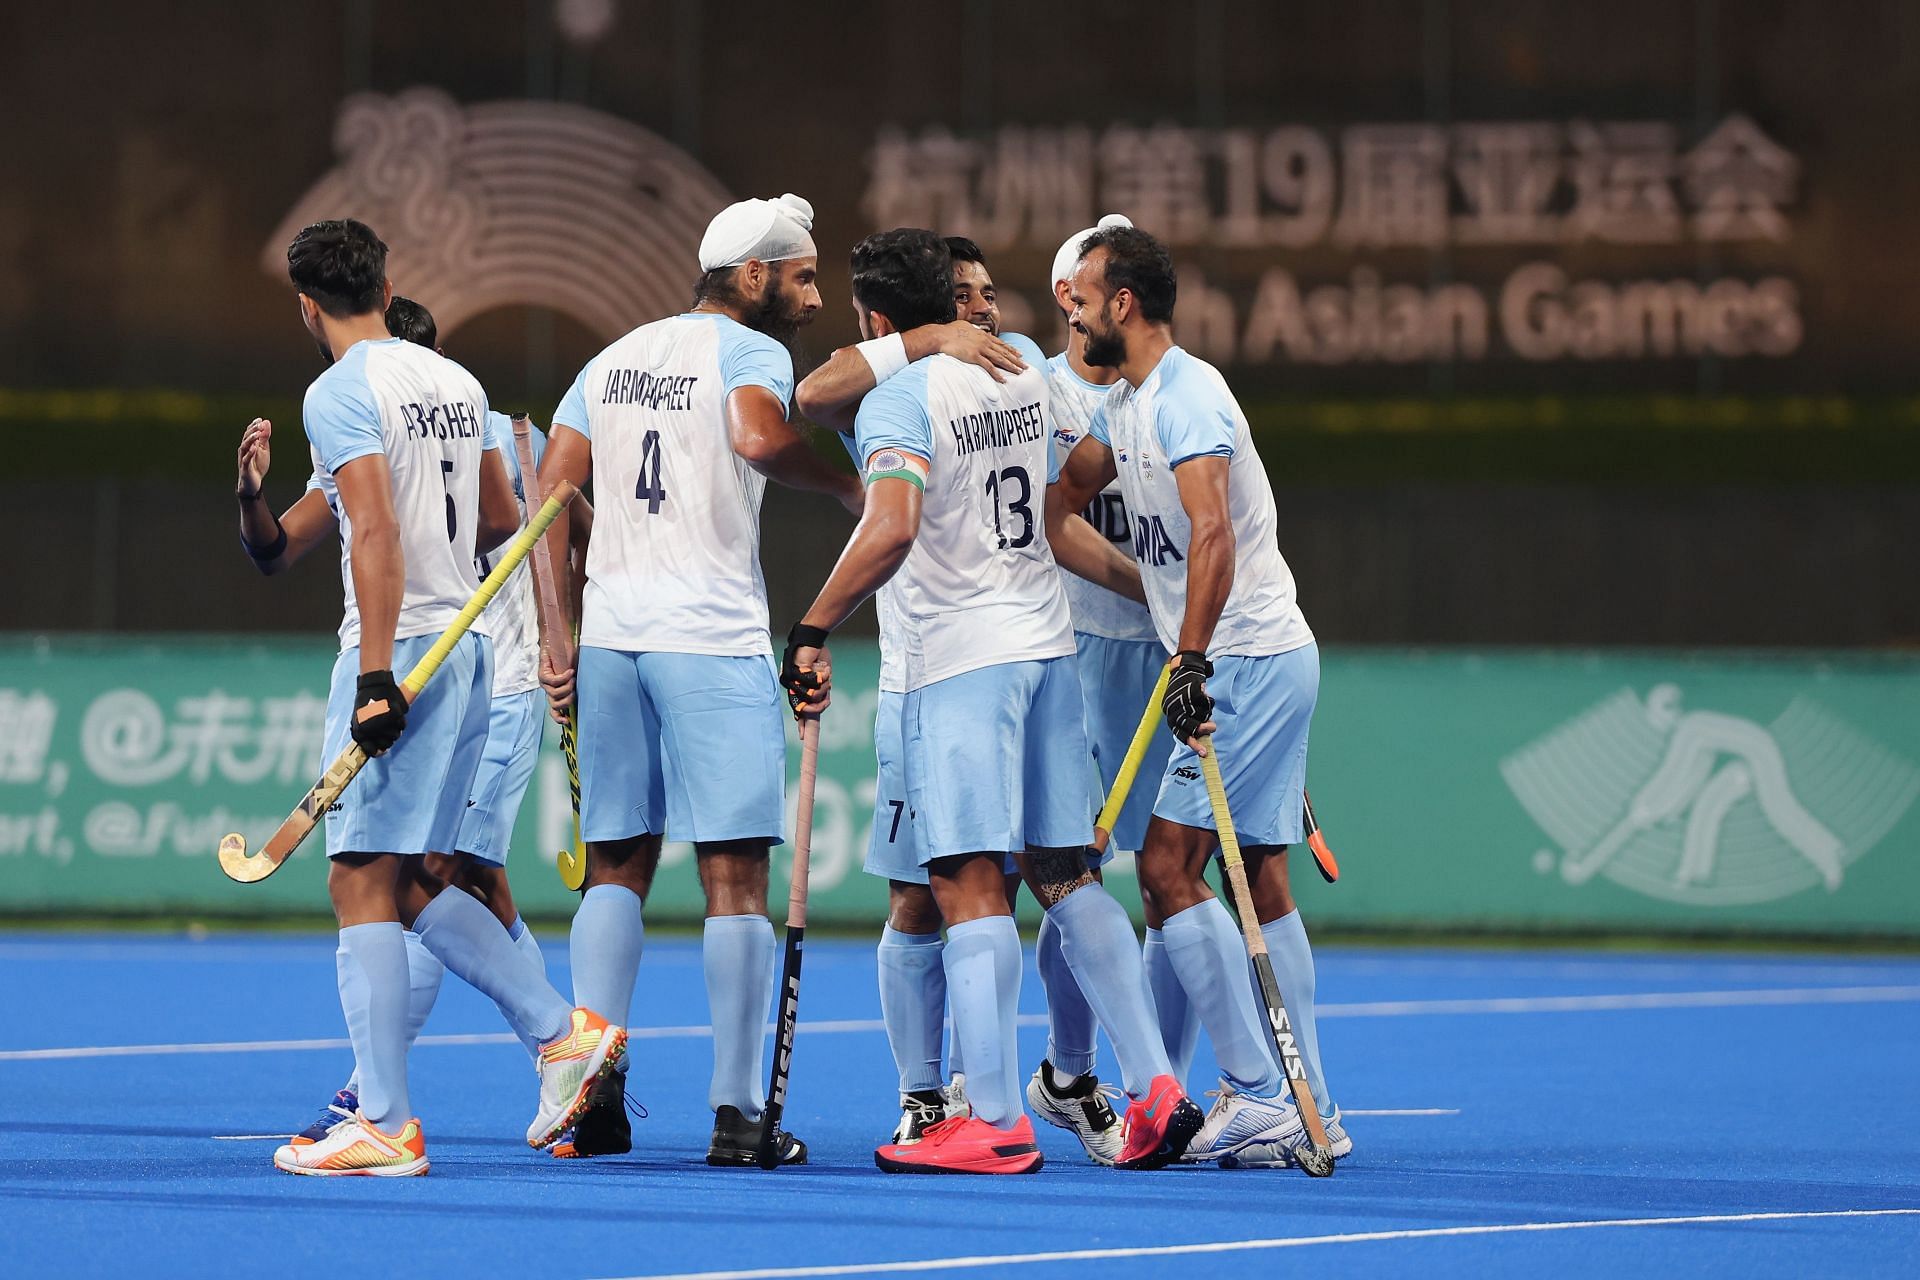 The Indian men are currently ranked third as per the FIH rankings